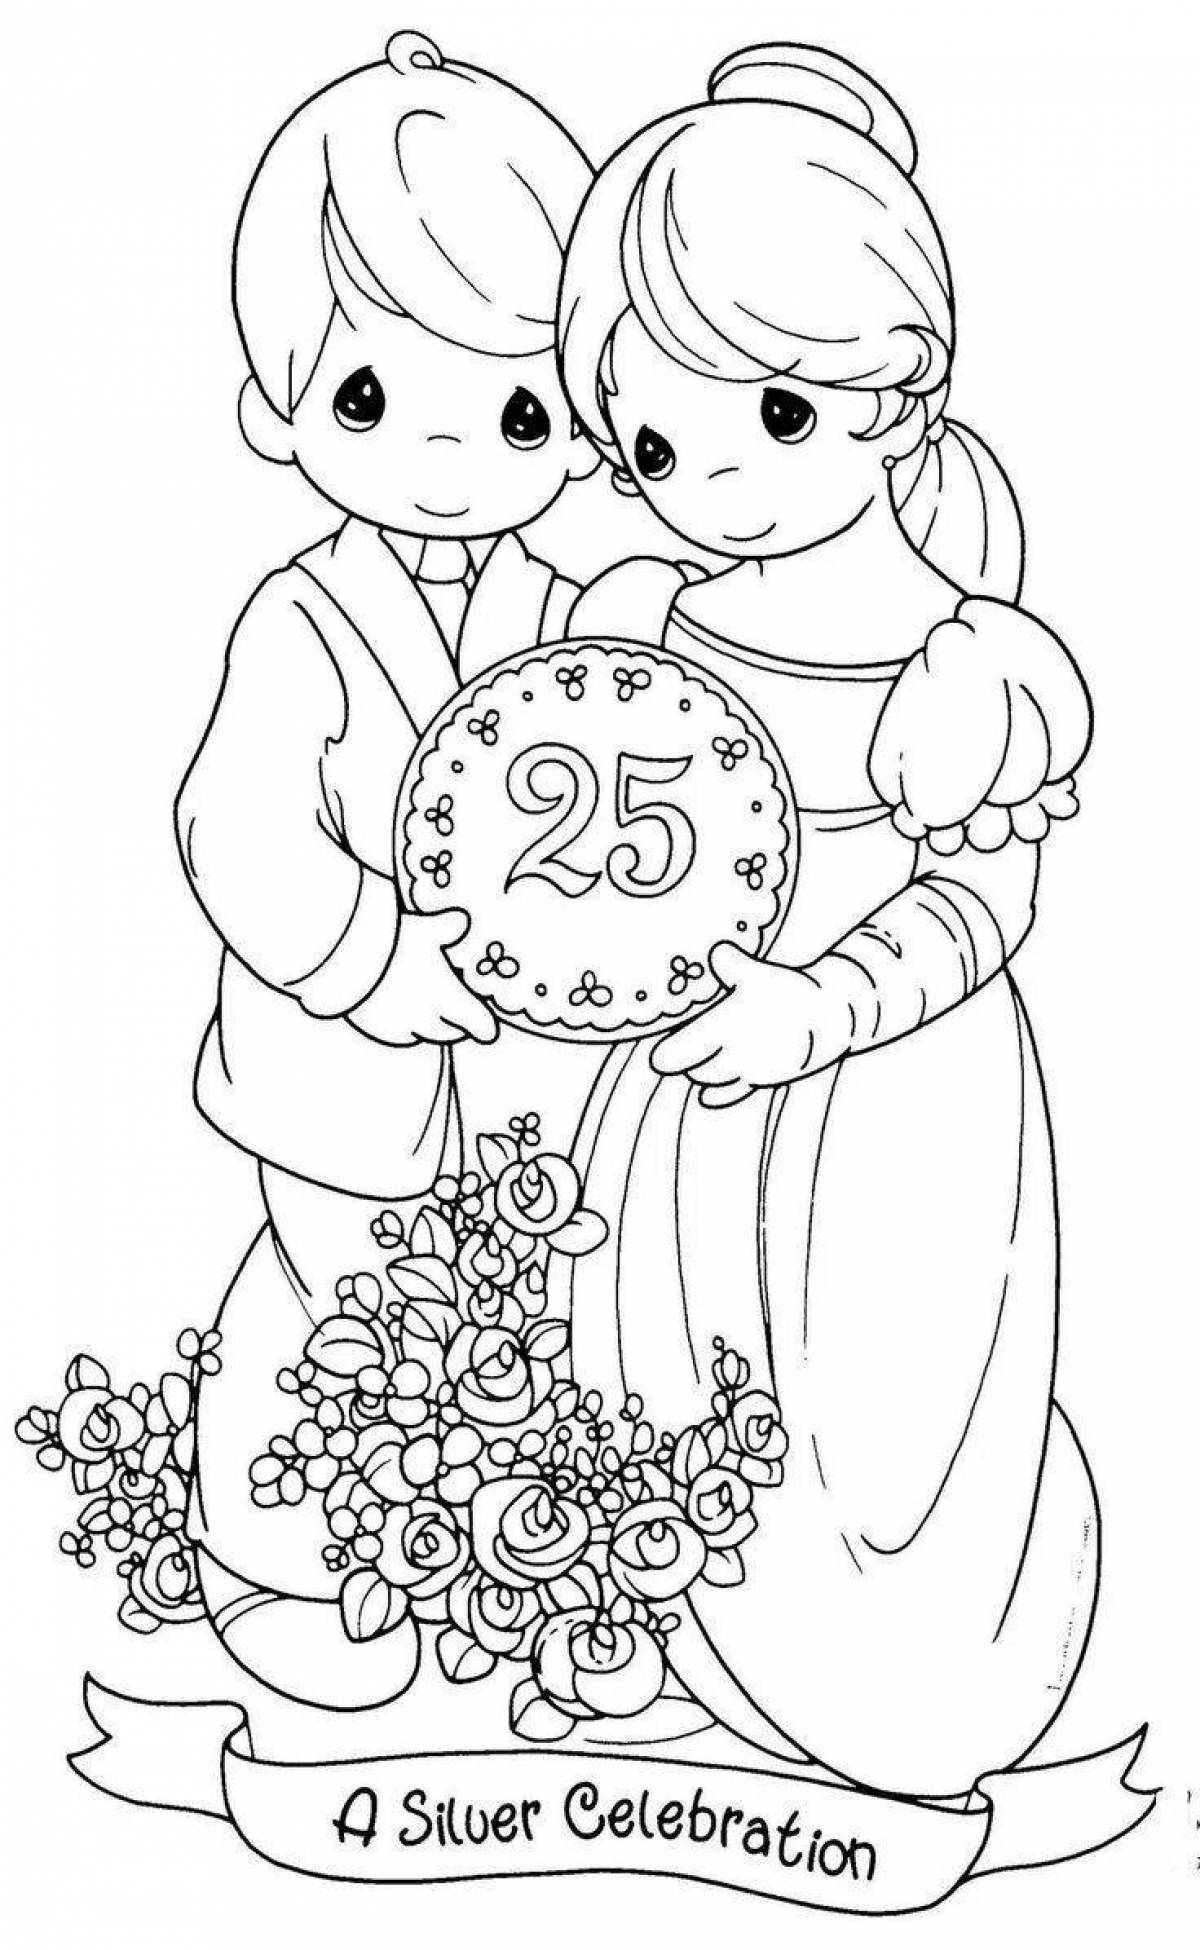 Blooming wedding anniversary coloring book